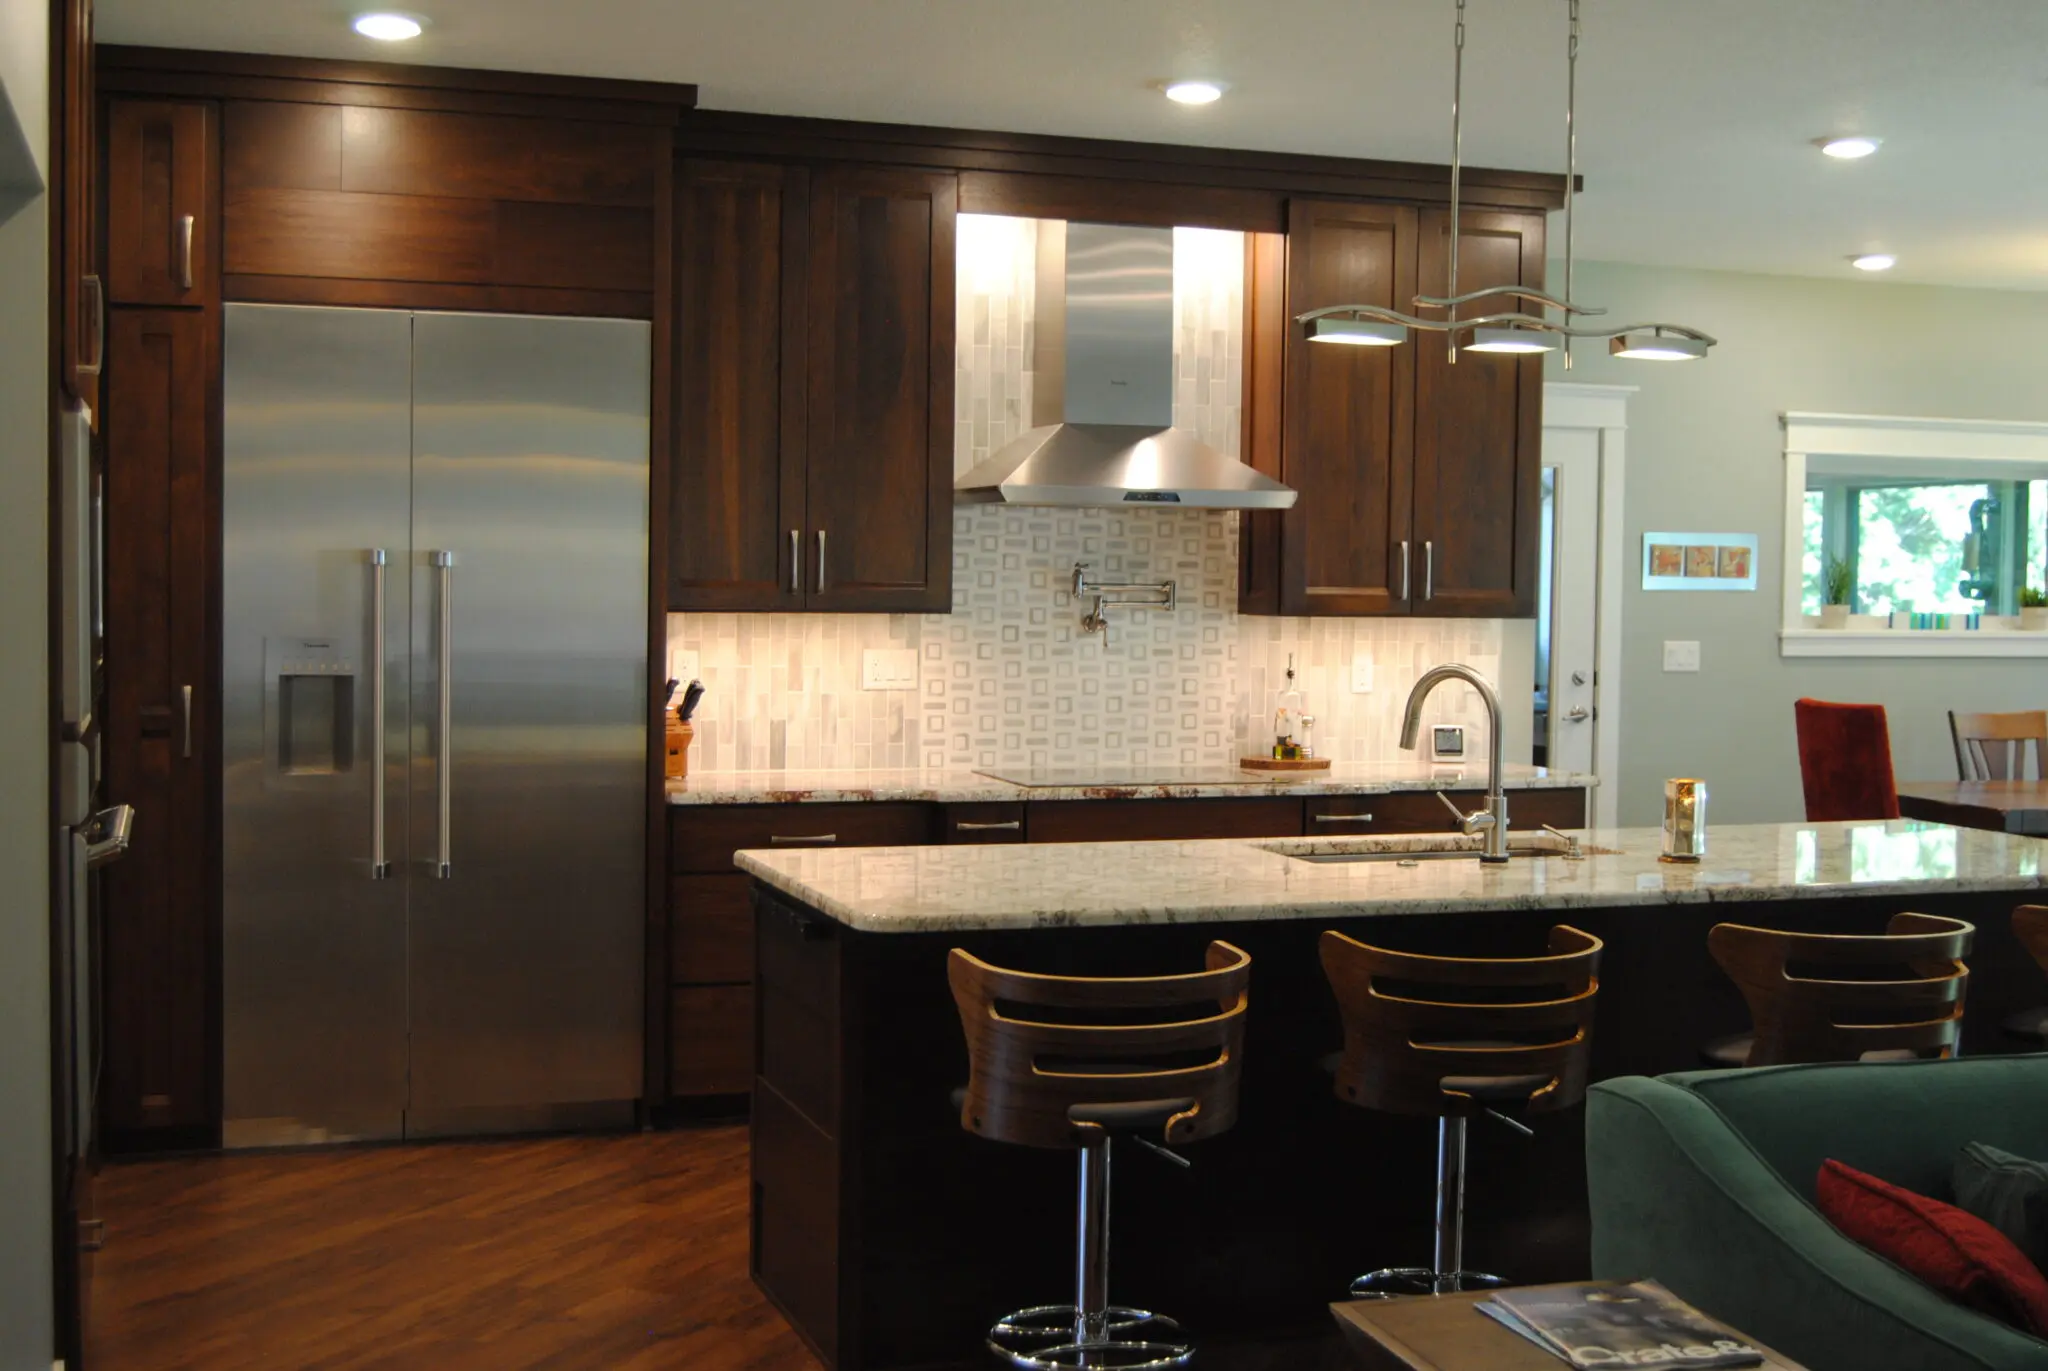 The modern transitional kitchen style with lighting effects